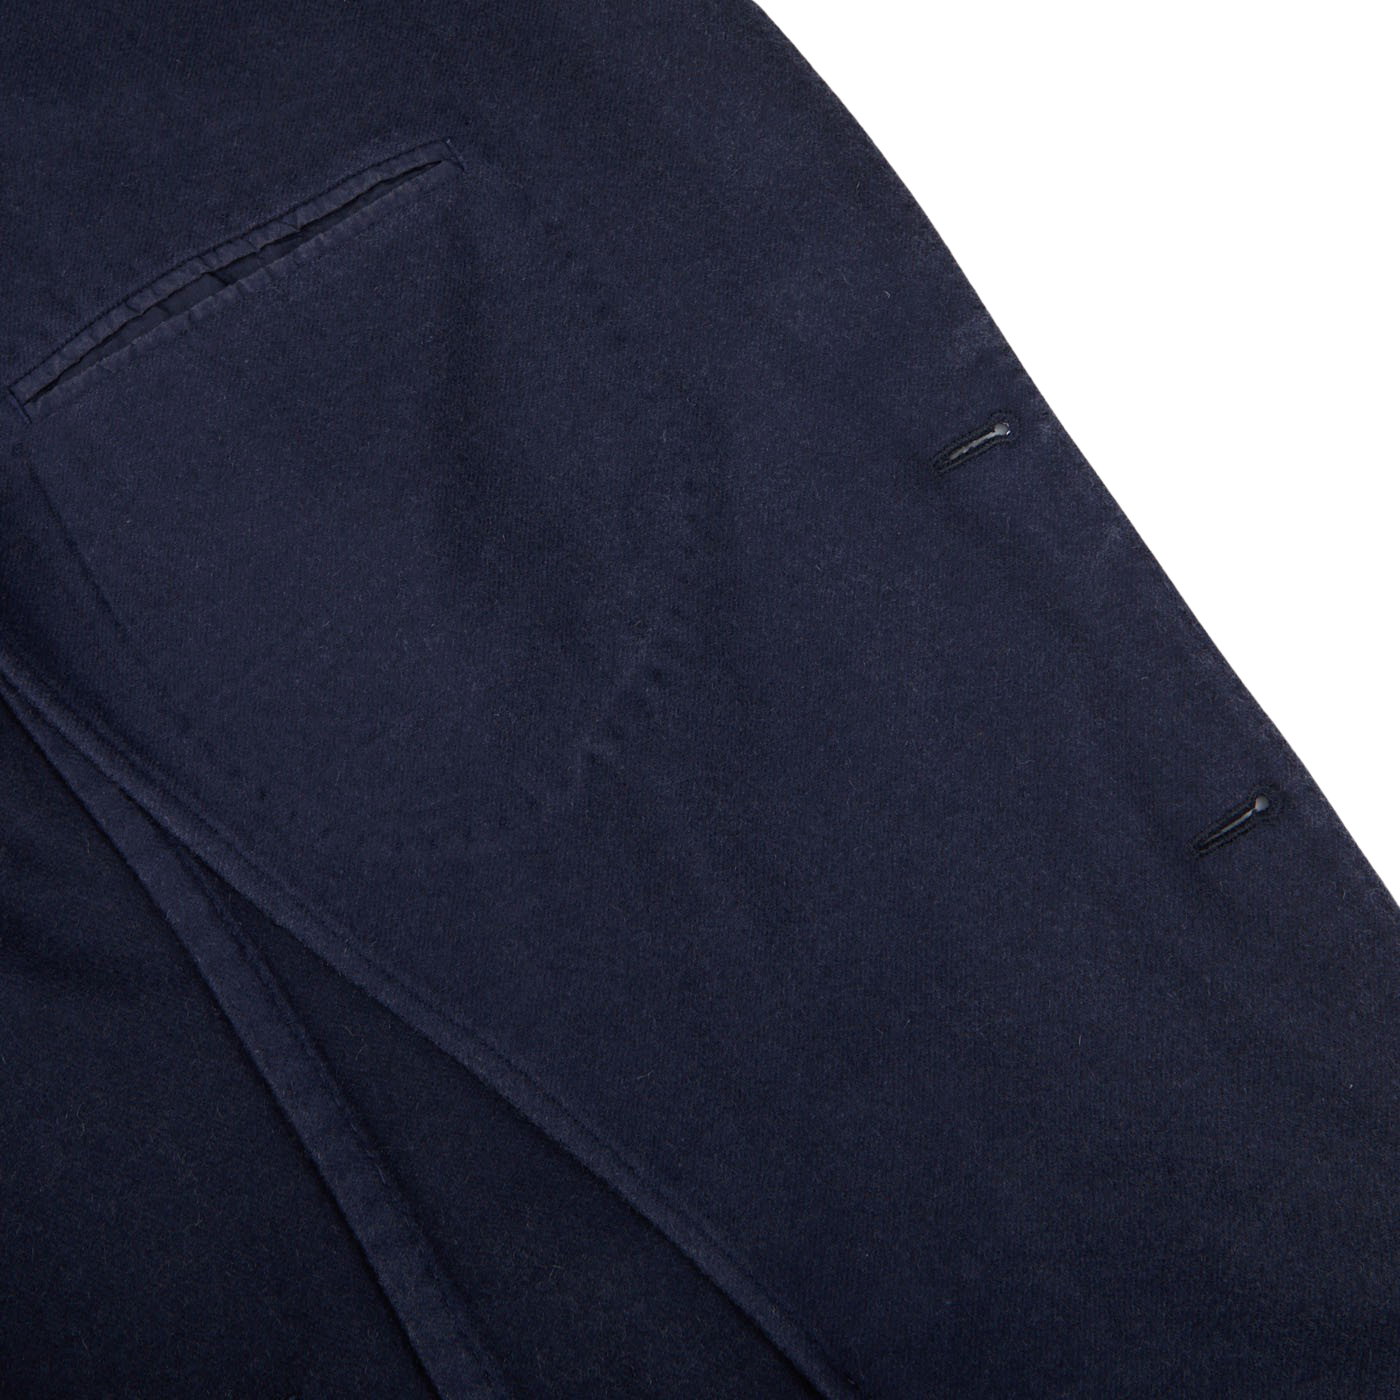 A close up of a dark blue pocket on a pair of pants with L.B.M. 1911 branding.